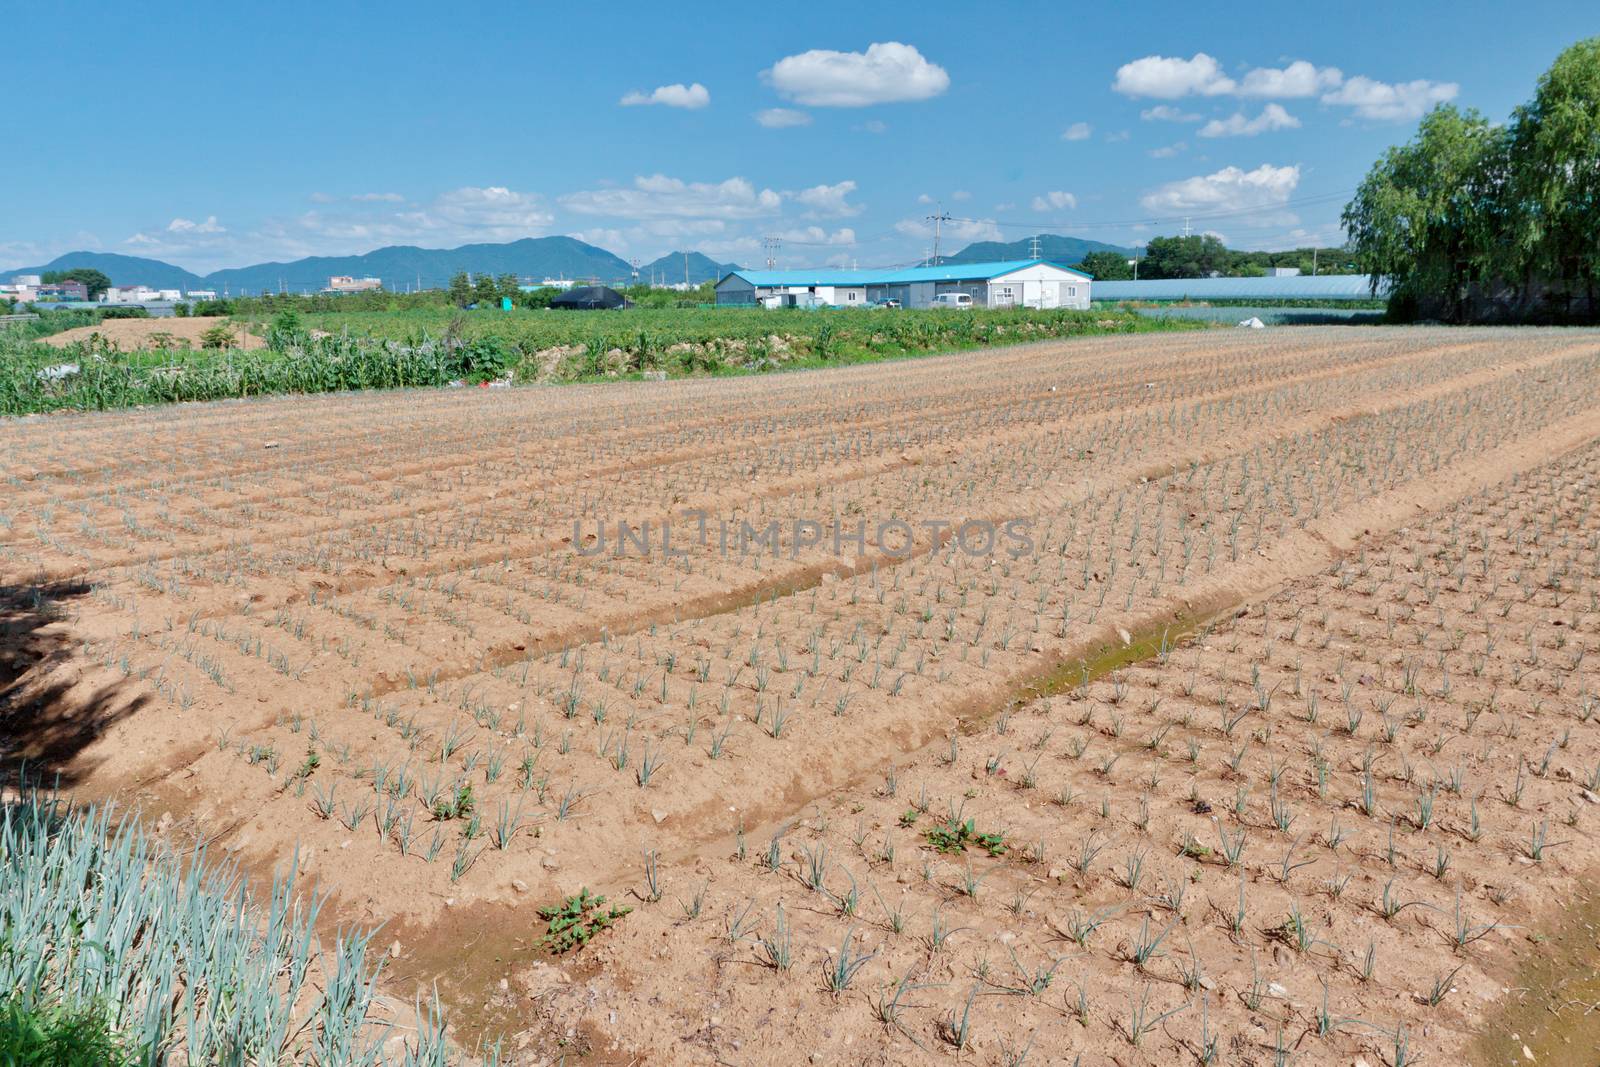 Growing green onion beds in the field in Korean countryside by dsmsoft